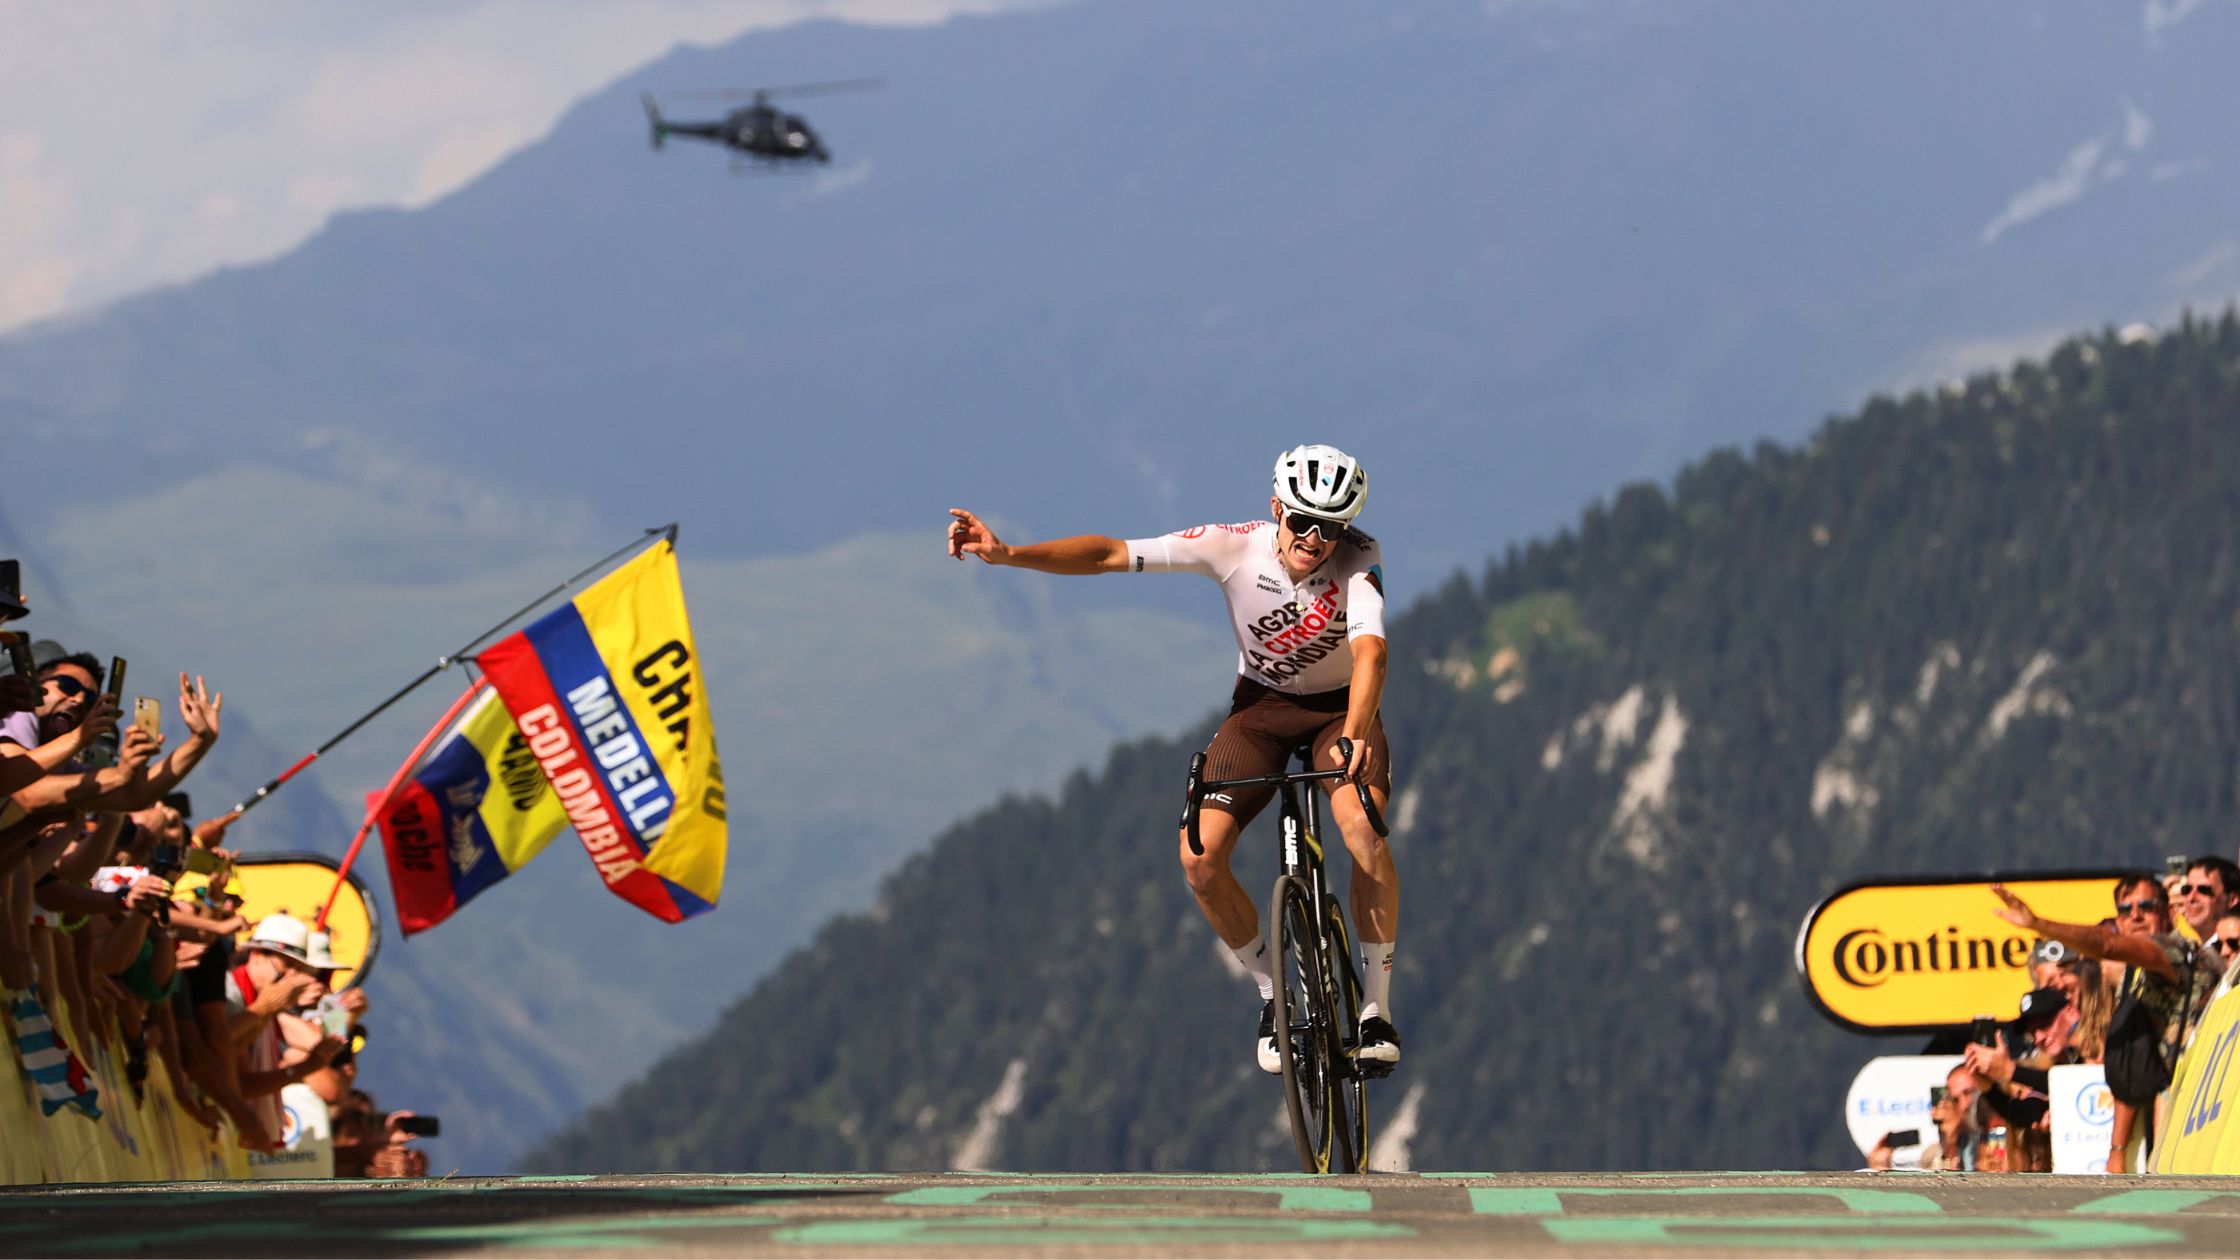 Felix Gall celebrates his stage win on stage 17 of the Tour de France.